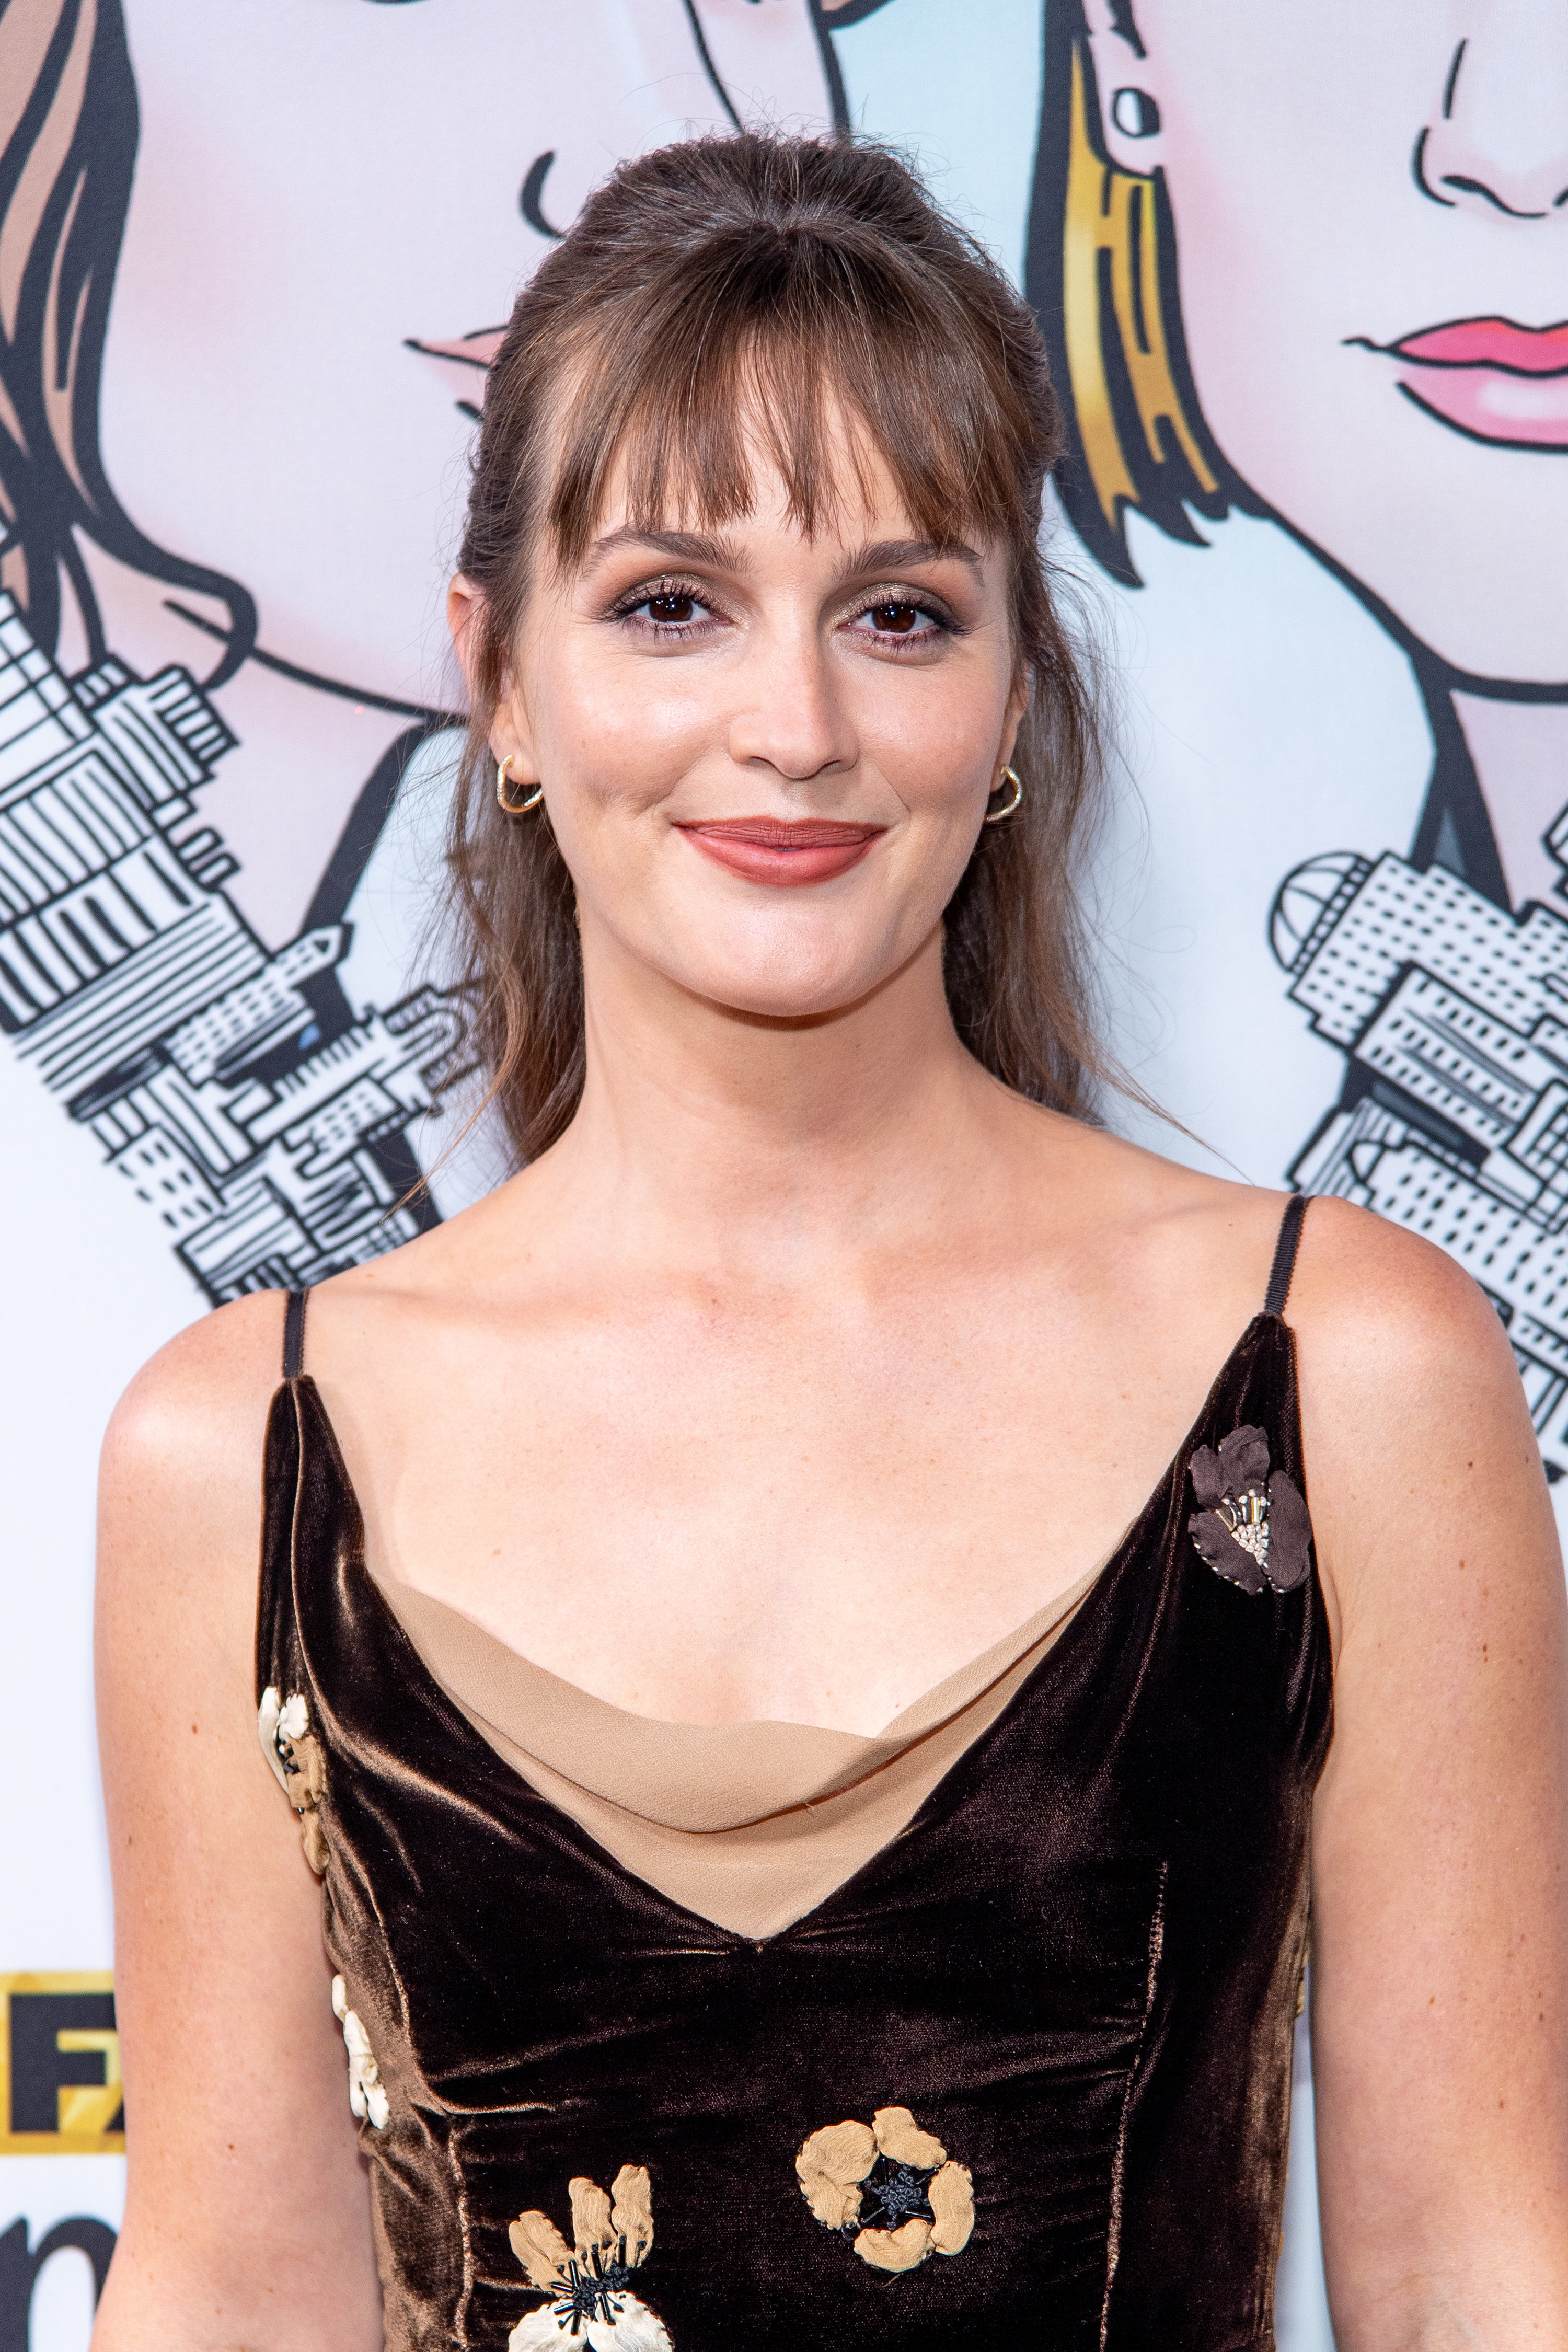 Leighton Meester on the red carpet